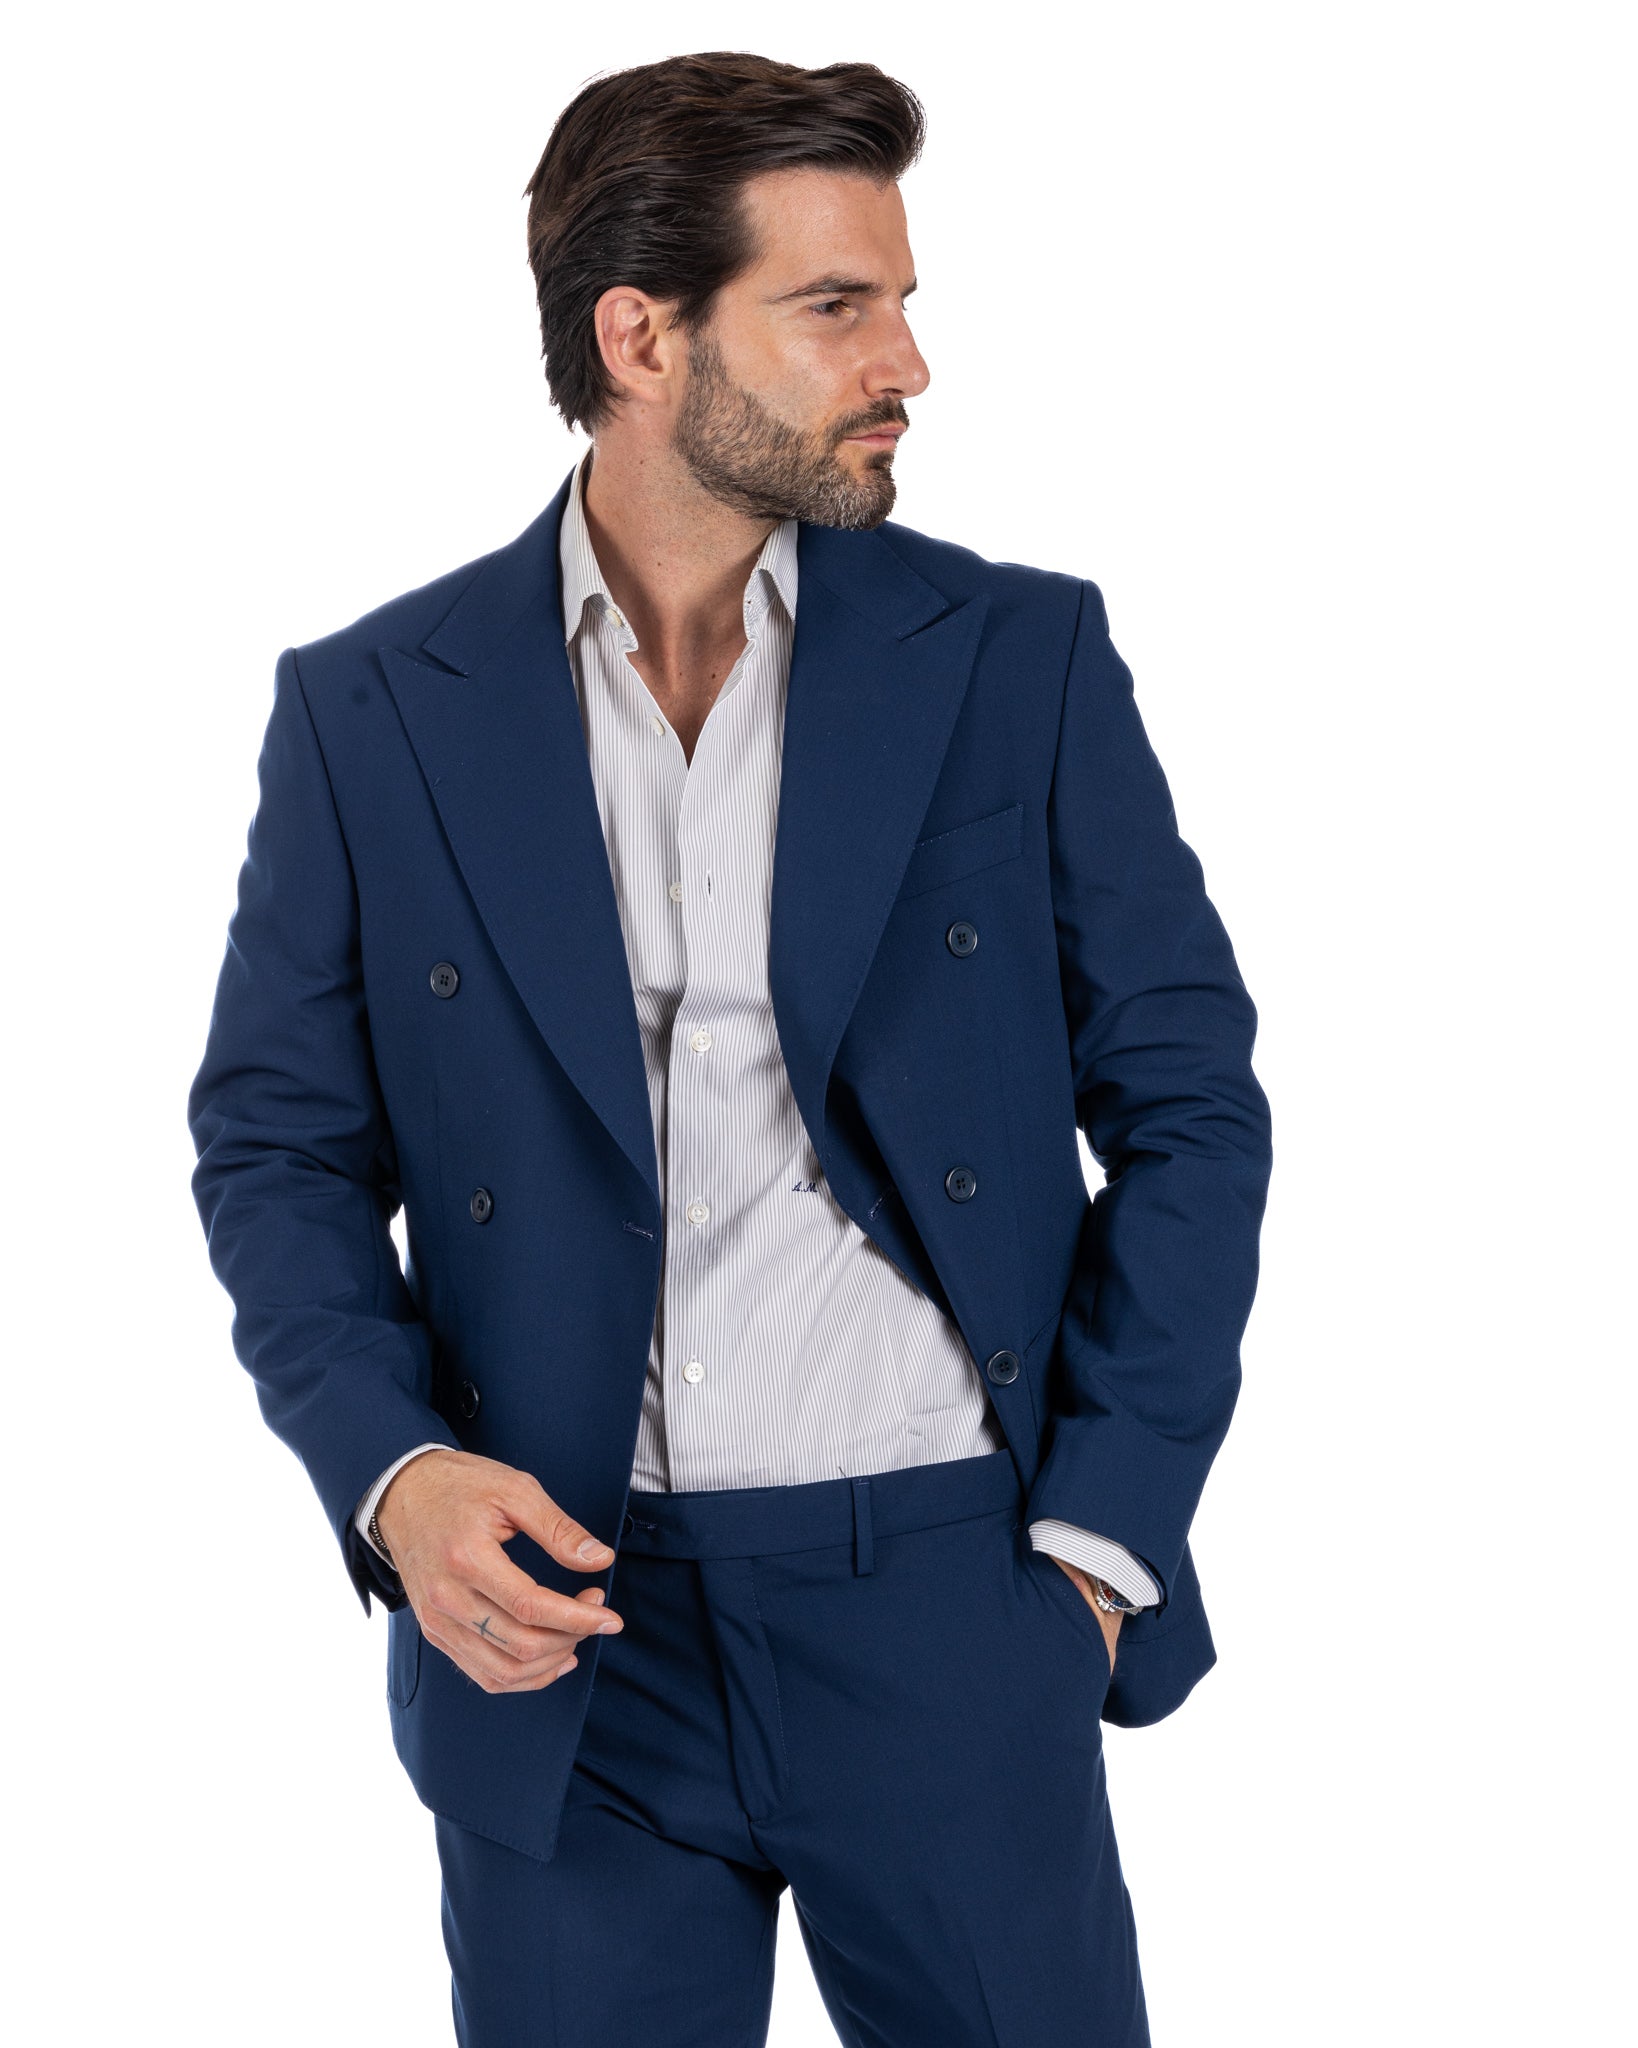 Monaco - blue double-breasted suit